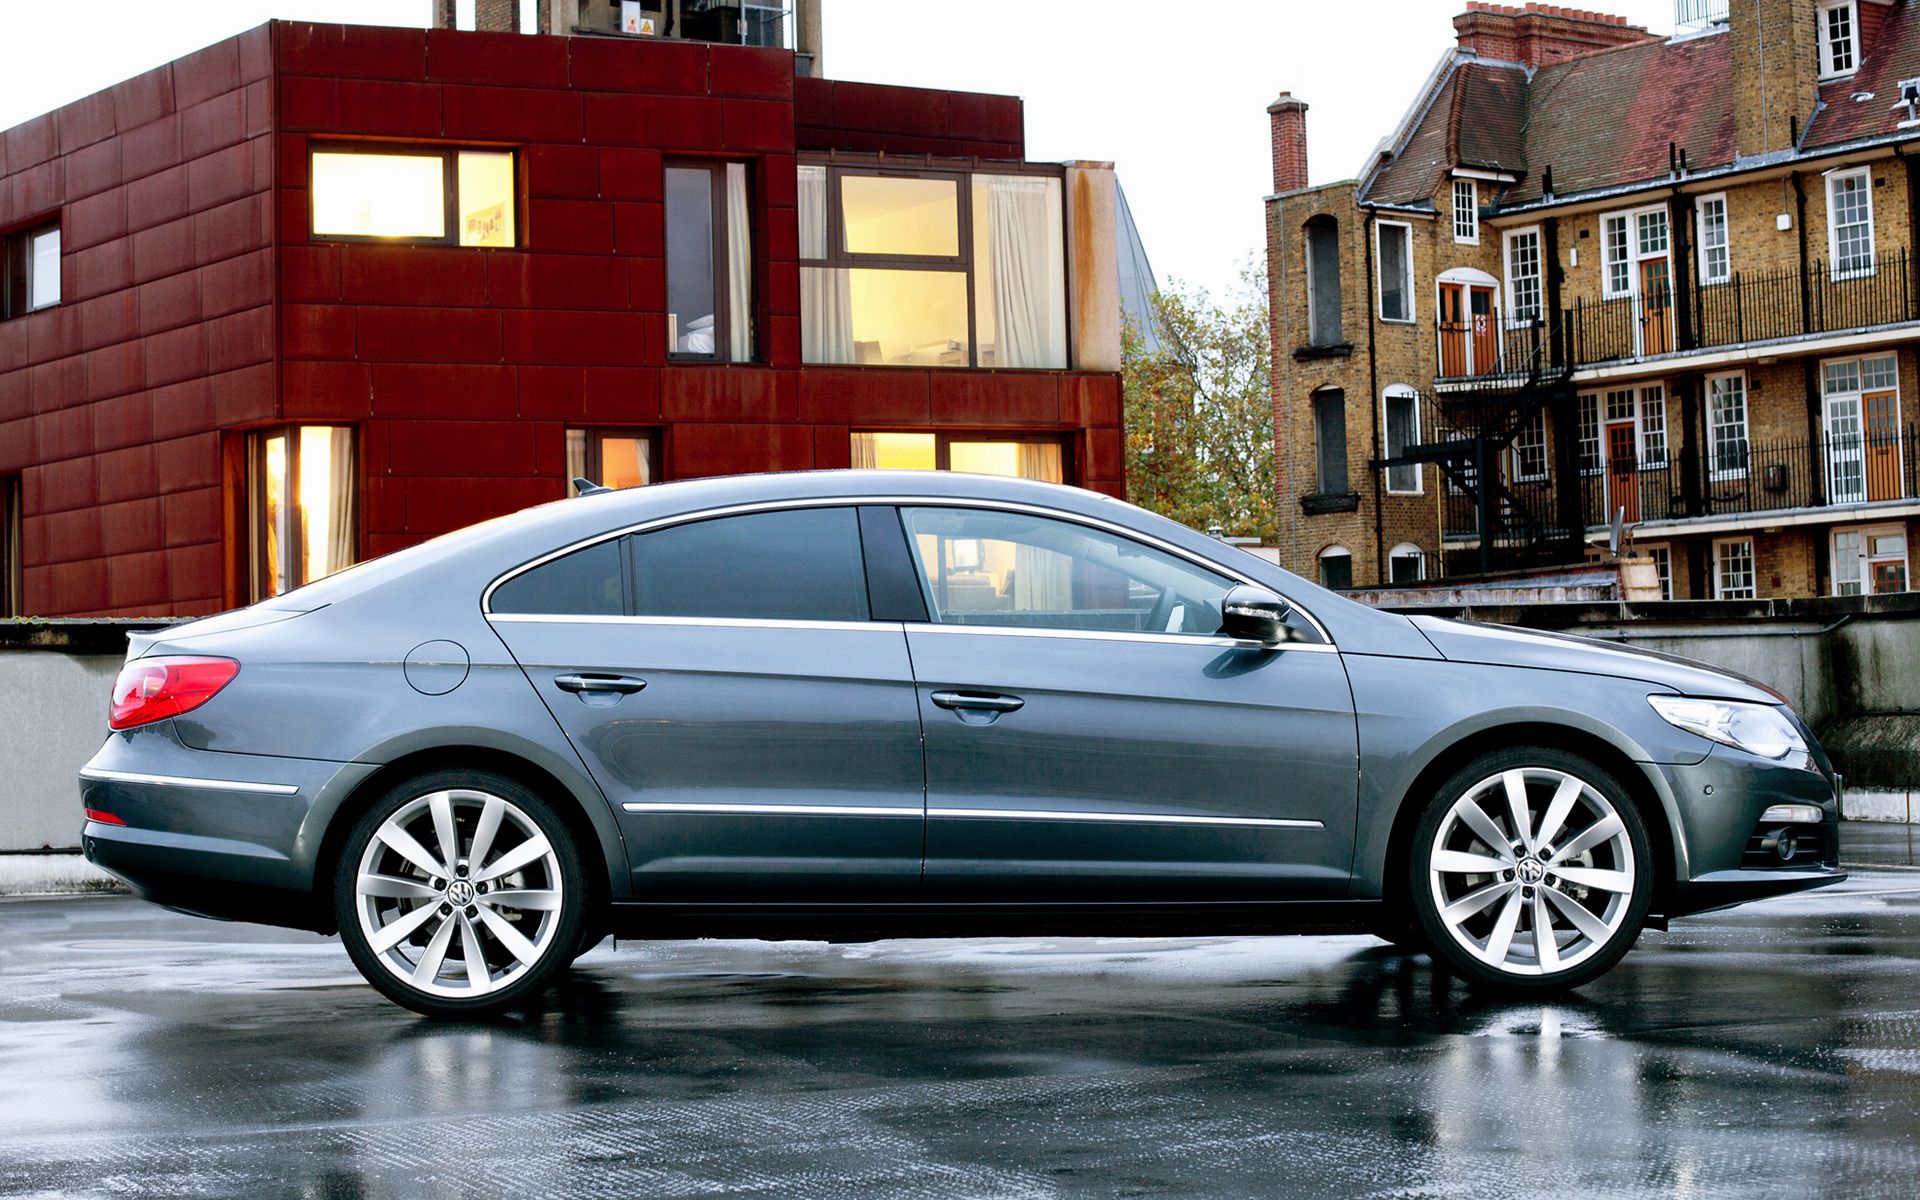 A side view of the 2008 Volkswagen CC.